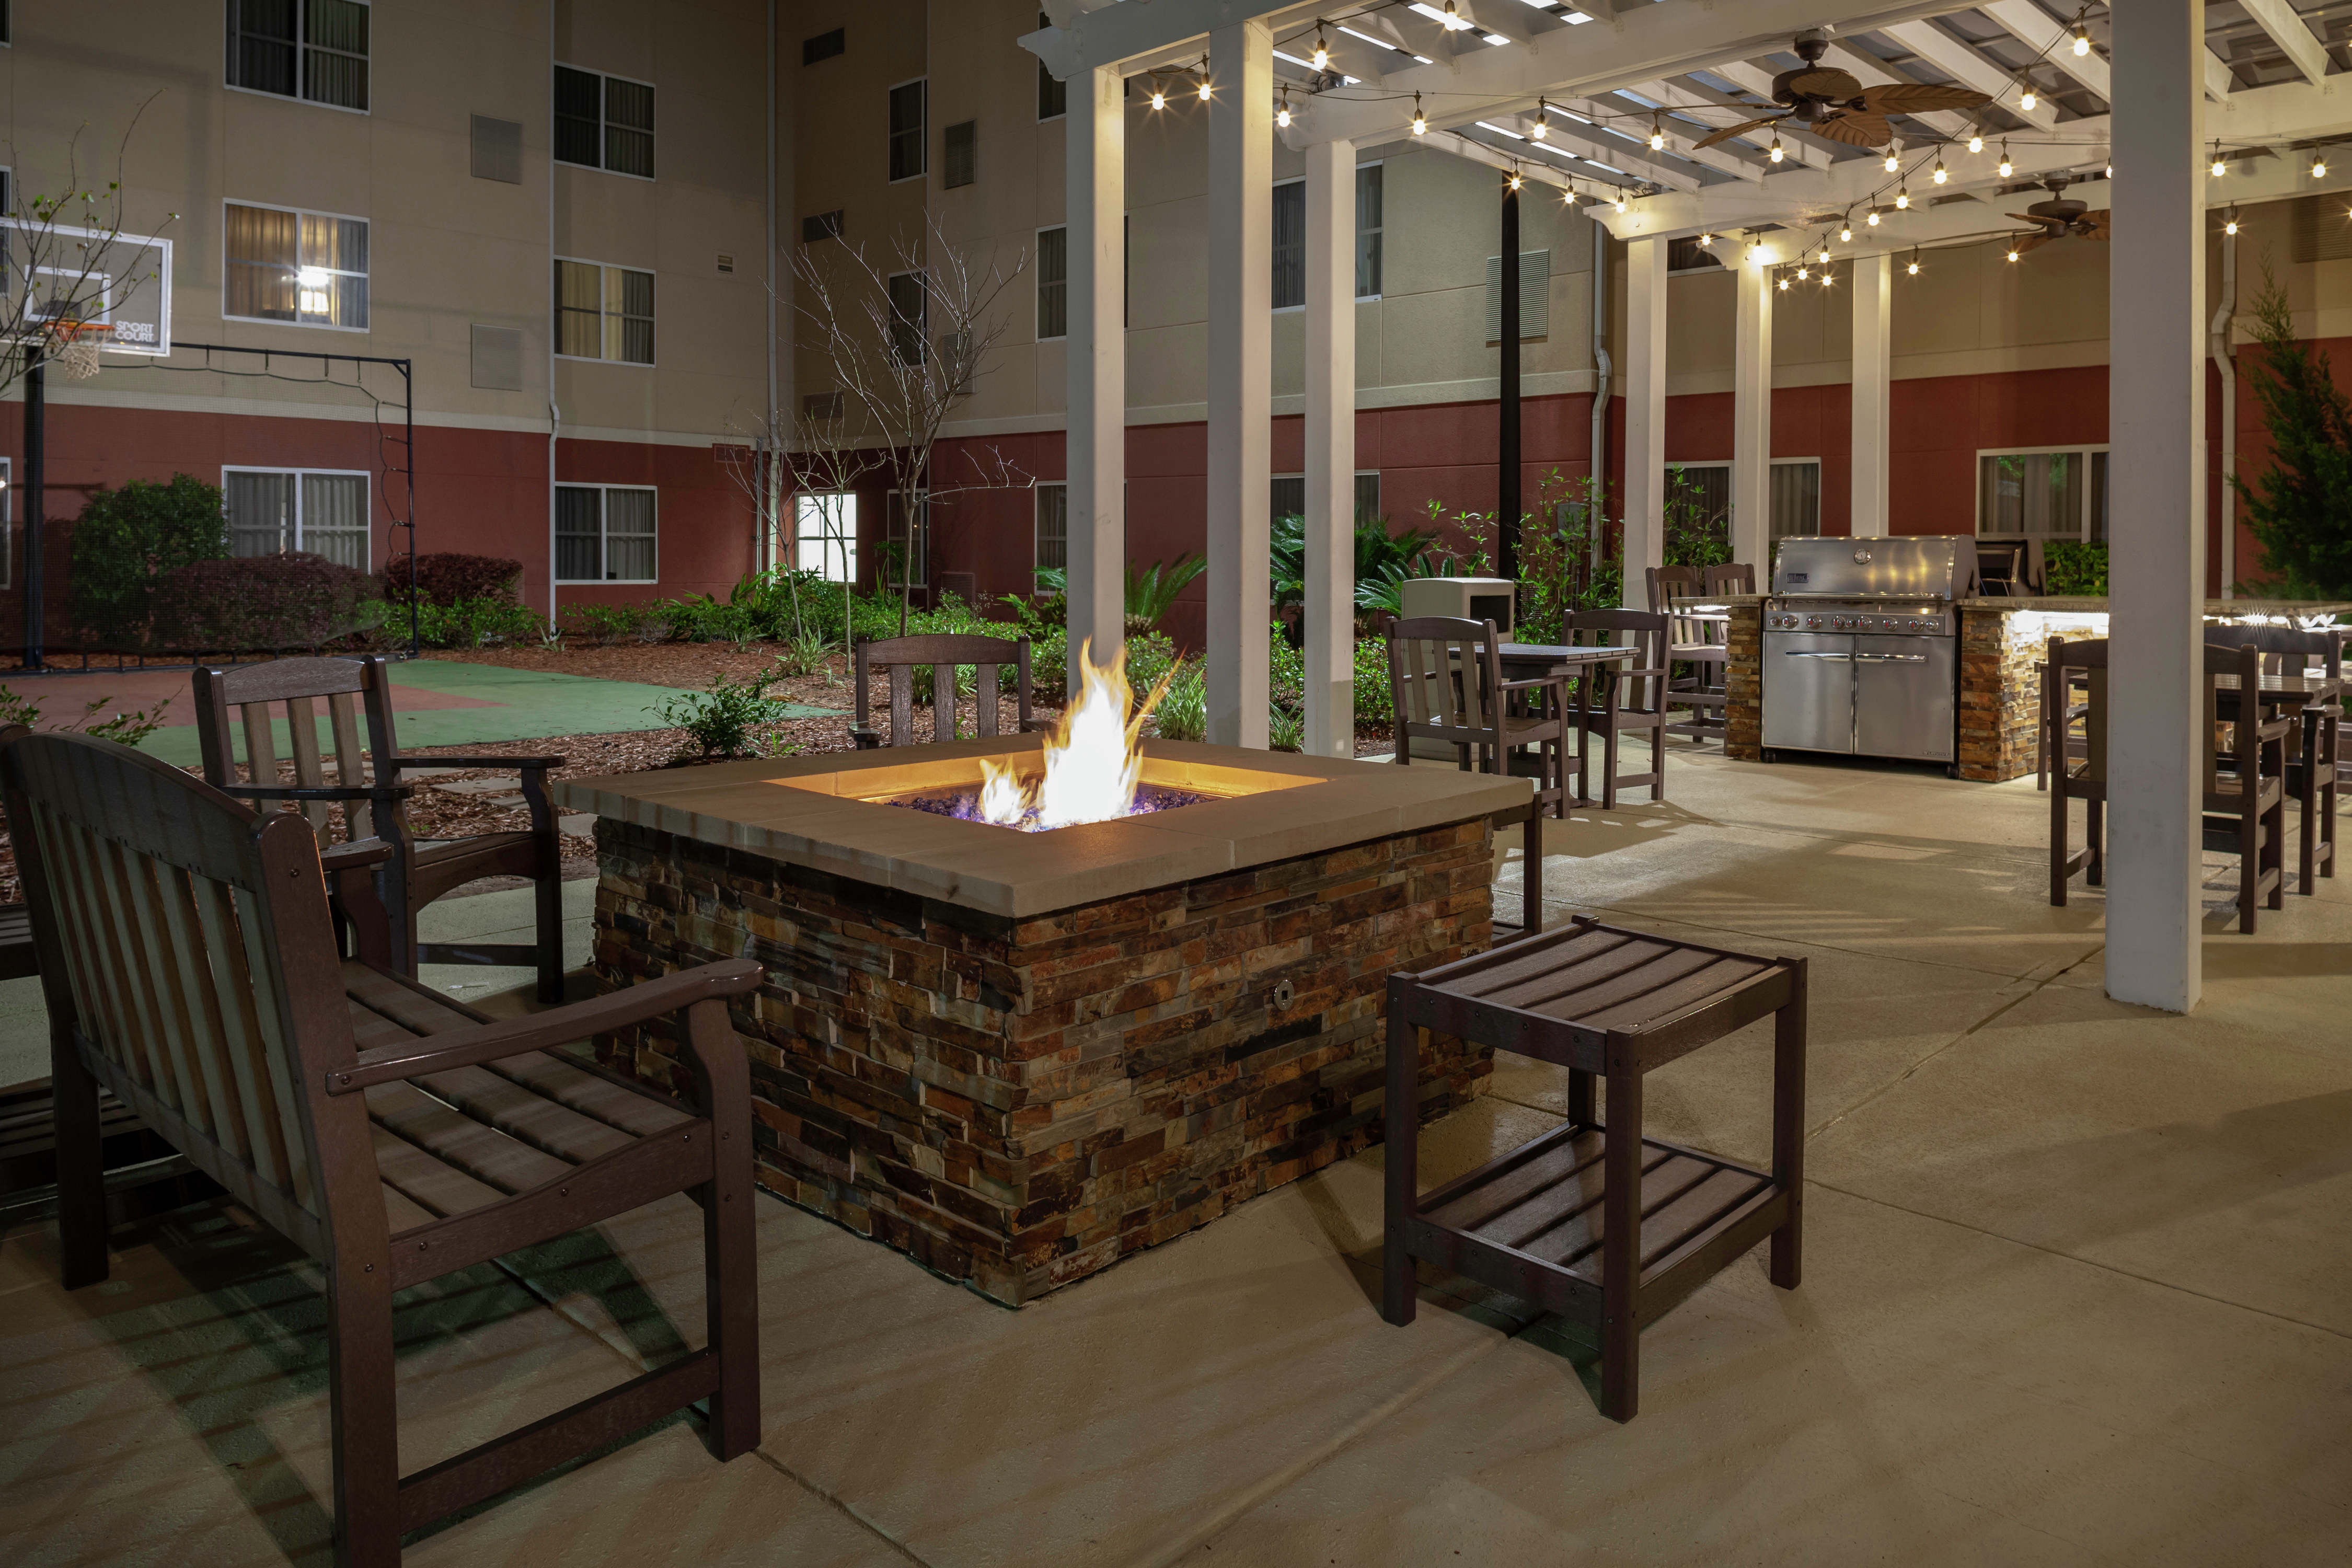 Outdoor Patio Seating And Fire Pit Evening